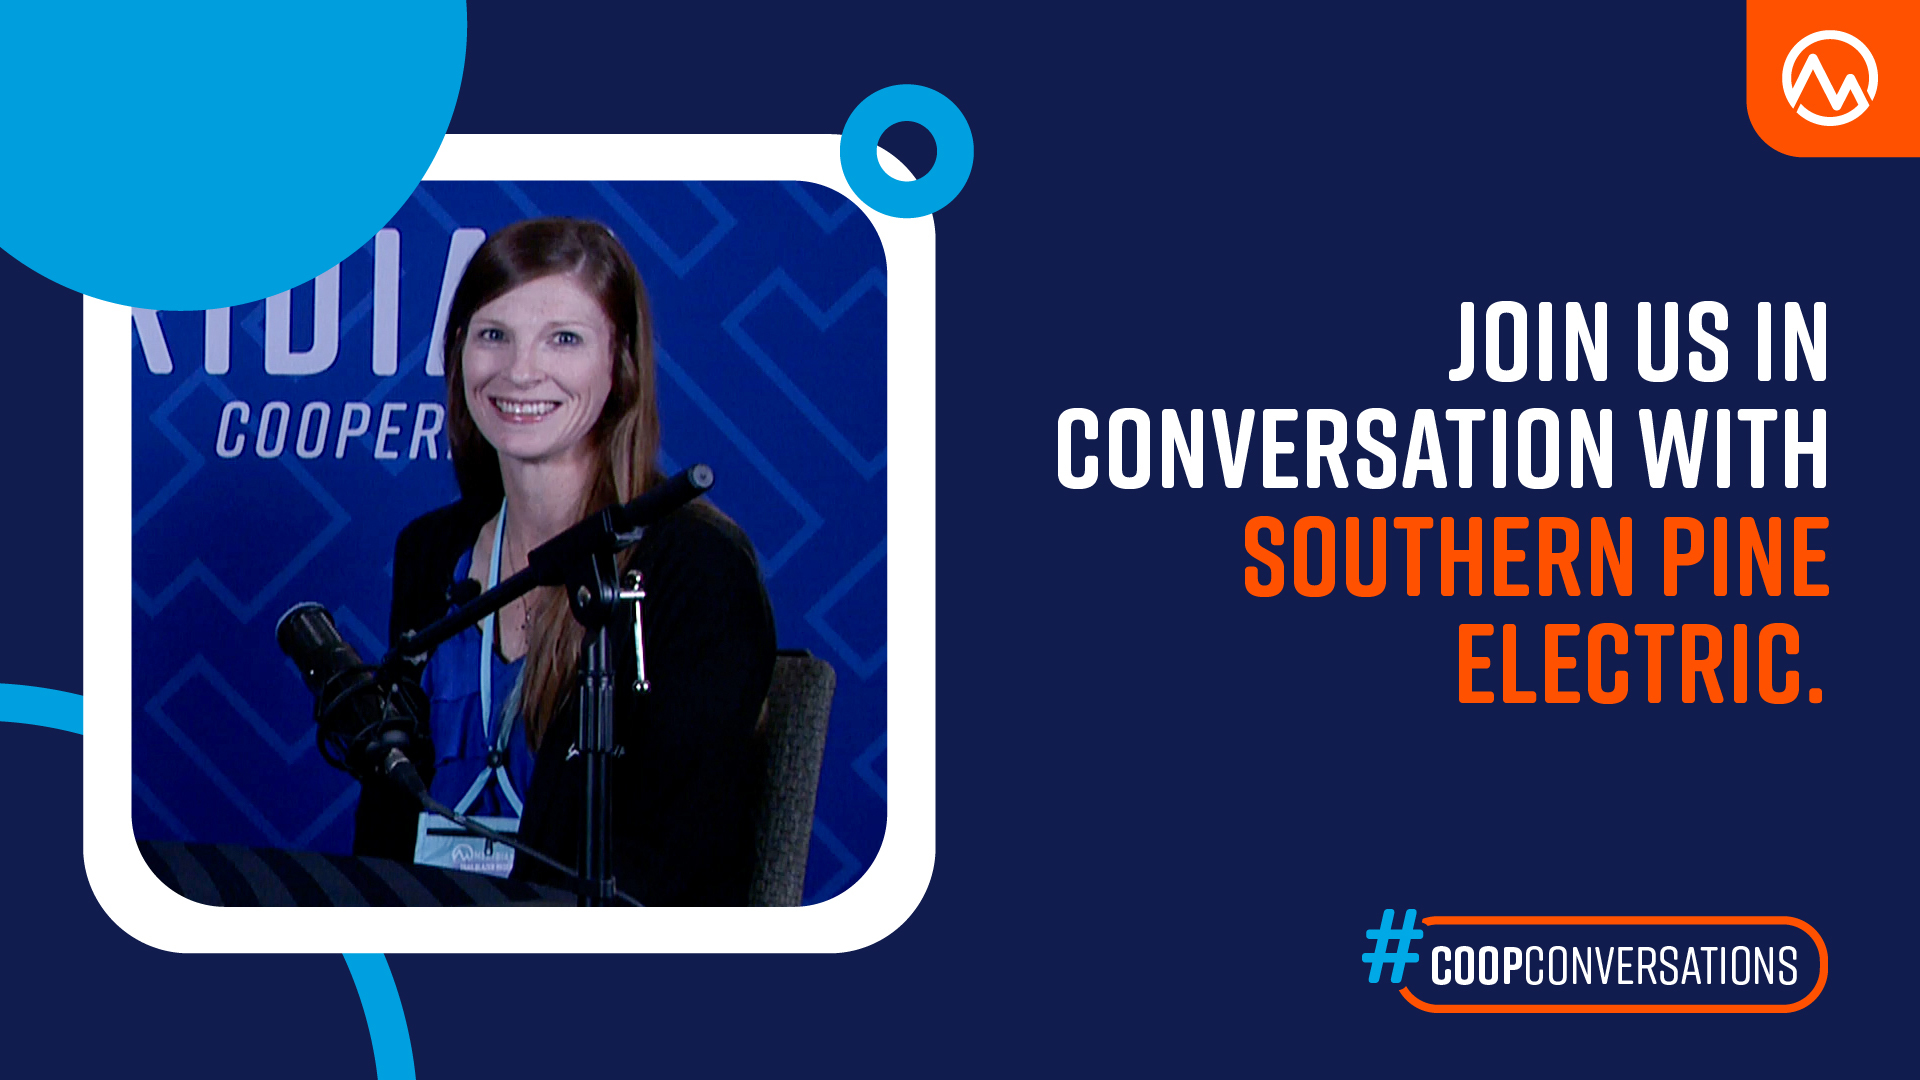 Kristen Thorne of Southern Pine EC joins Meridian Cooperative for Co-Op Conversations.